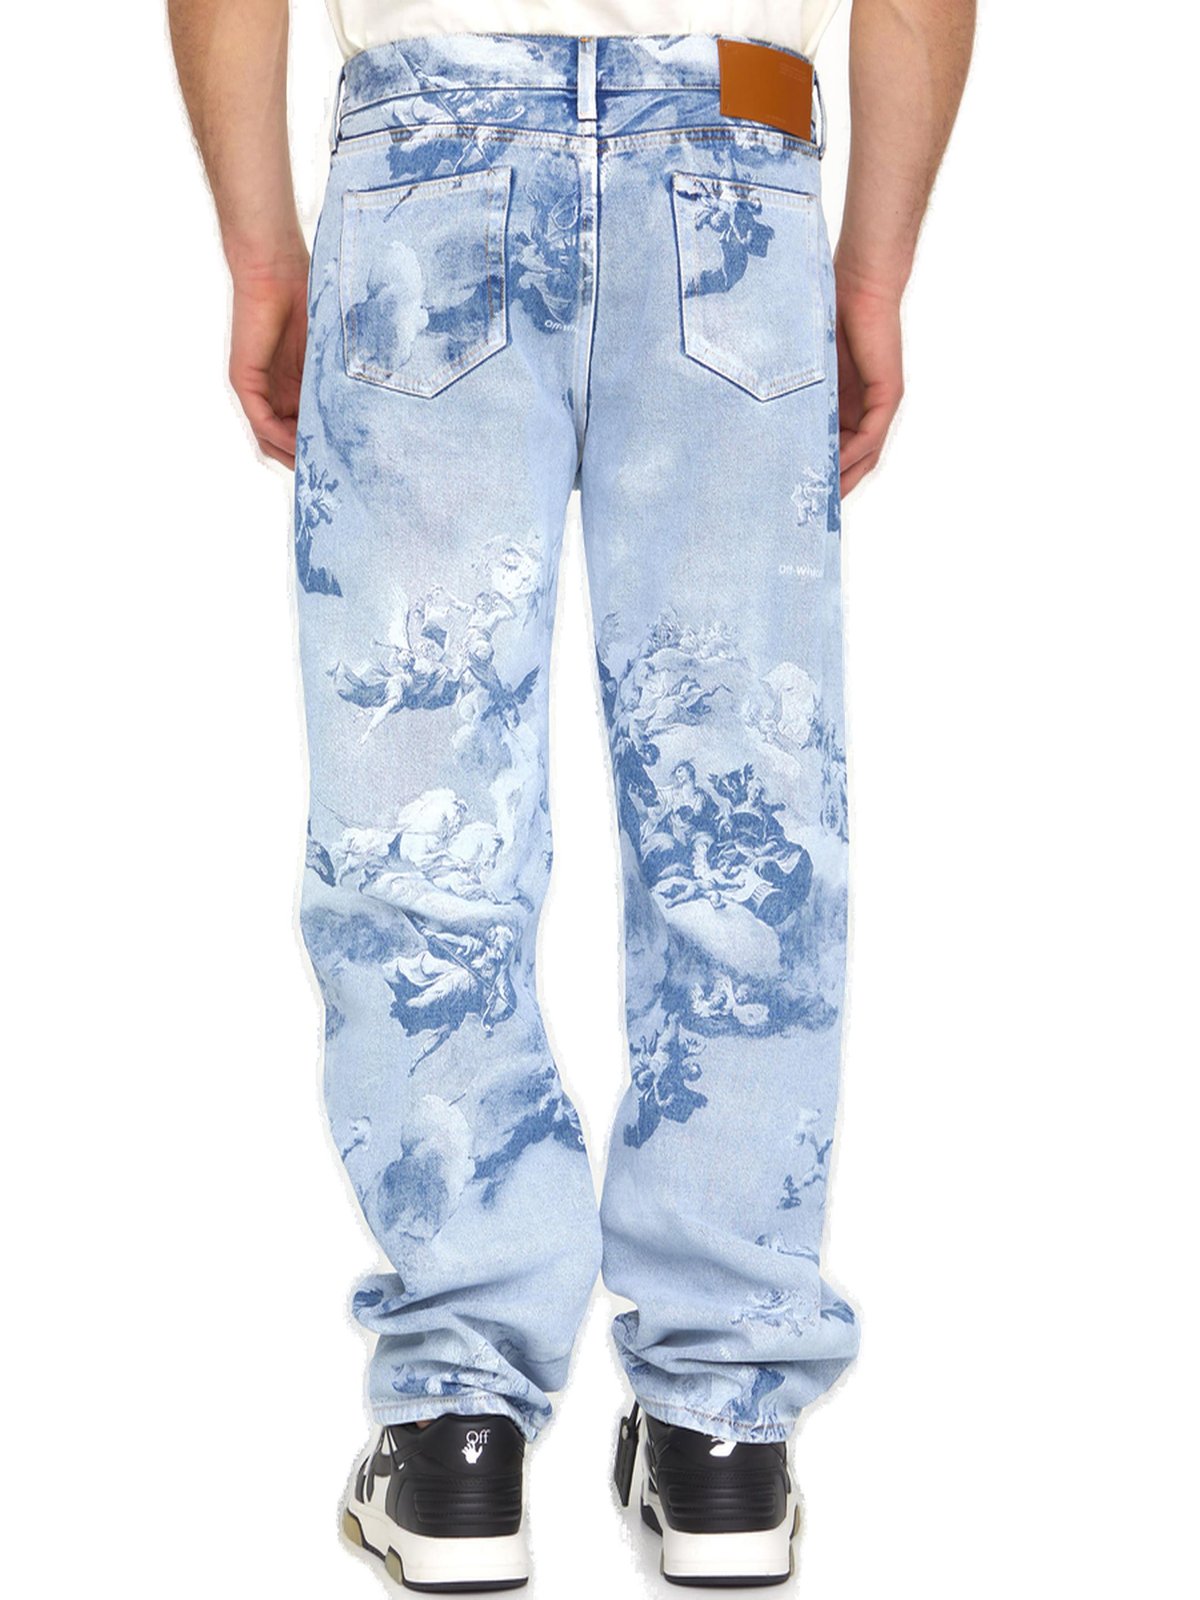 Off-White Graphic Printed Straight Leg Jeans